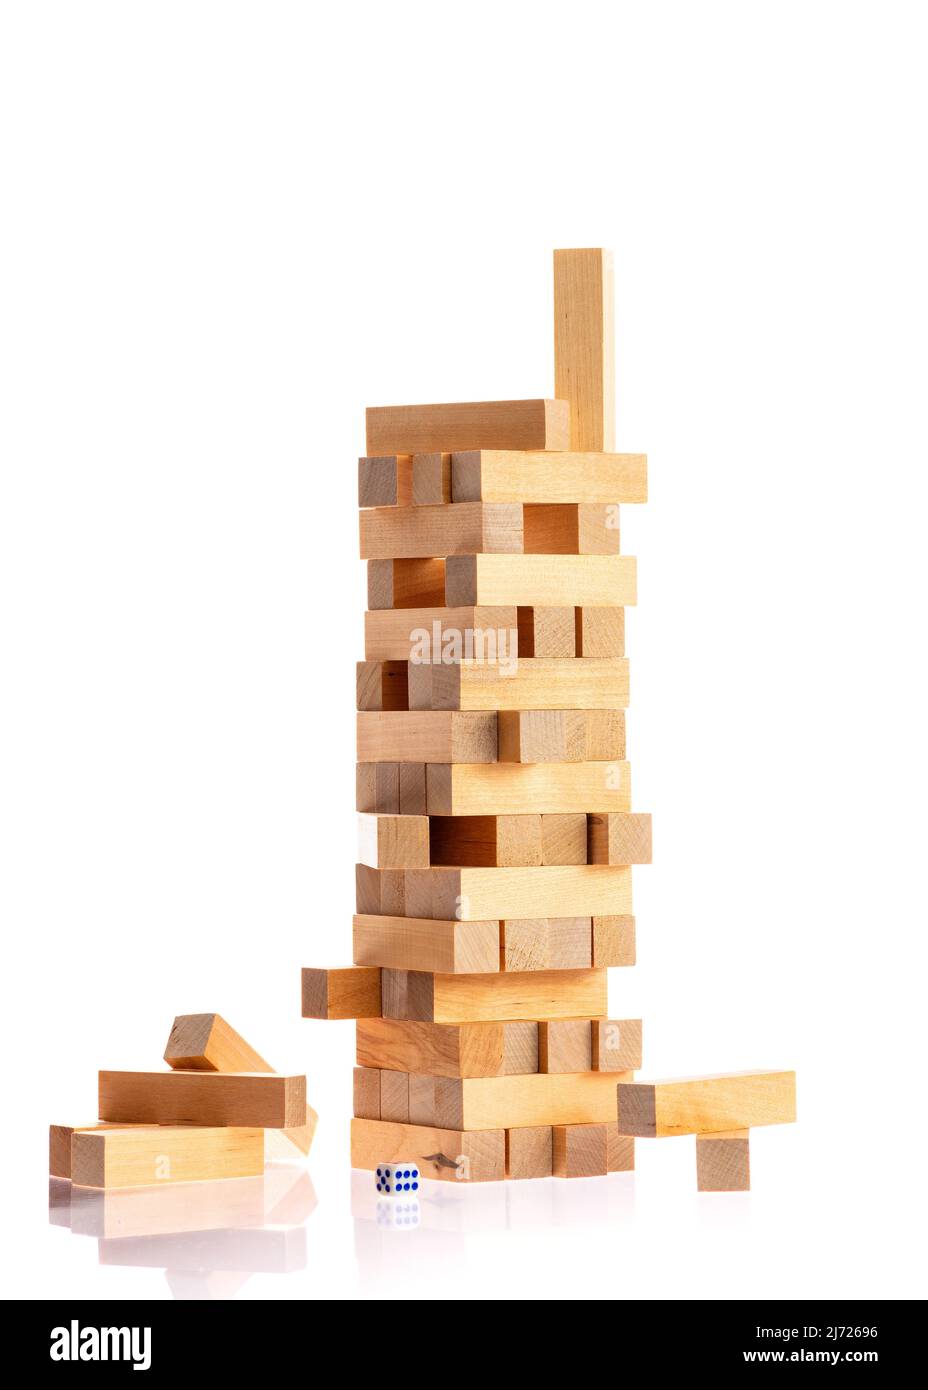 tower made of wooden blocks falling on white background Stock Photo